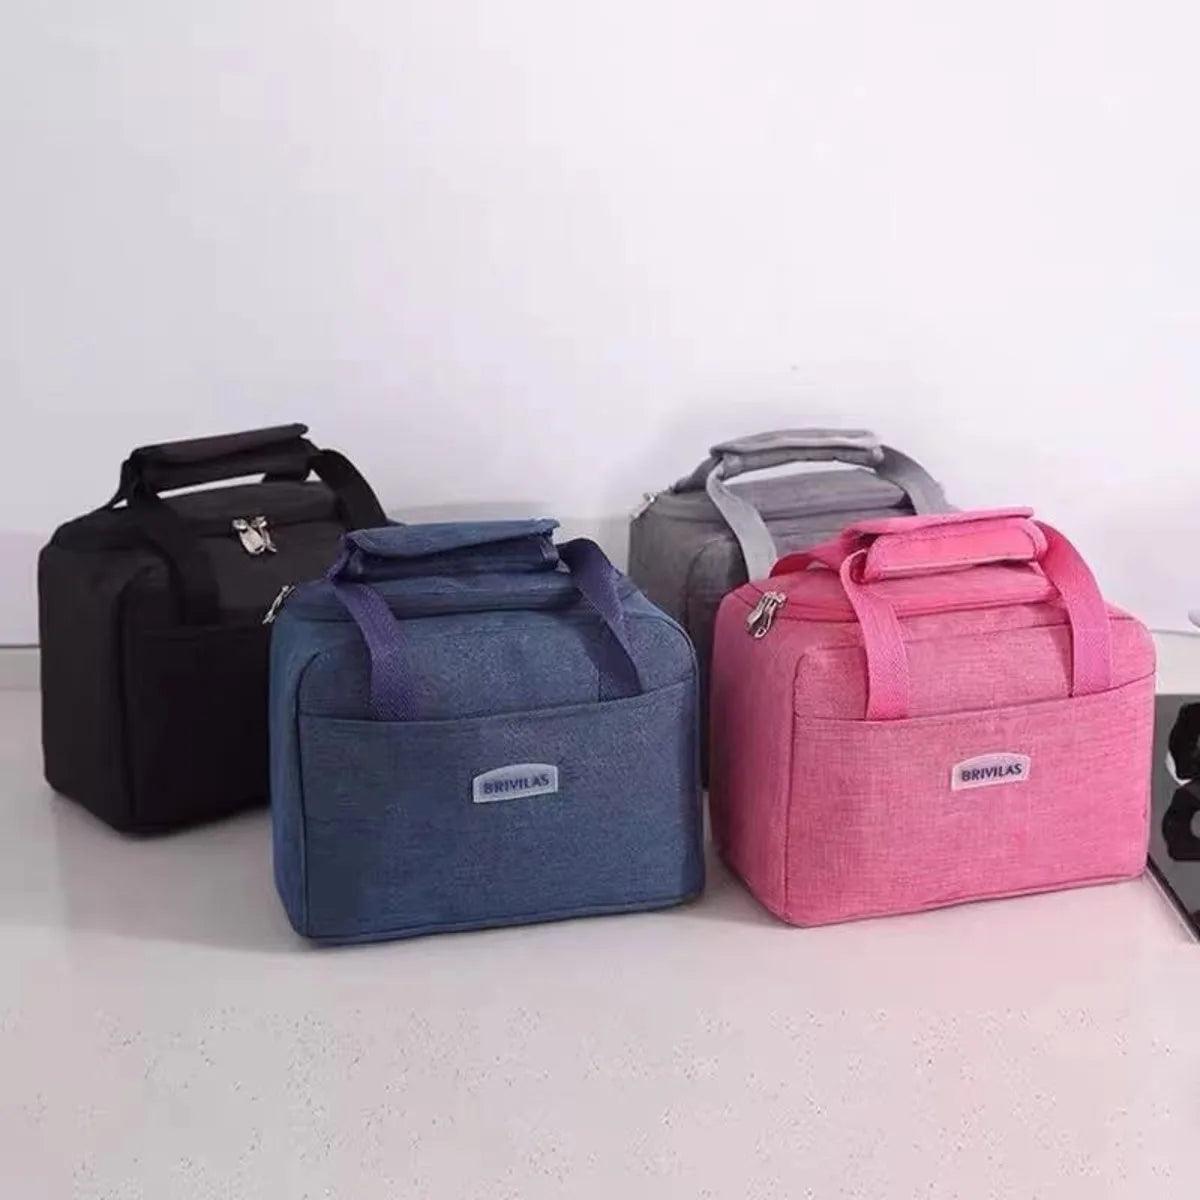 Portable Thermal Insulated Lunch Bag with Assorted Color Options  ourlum.com   